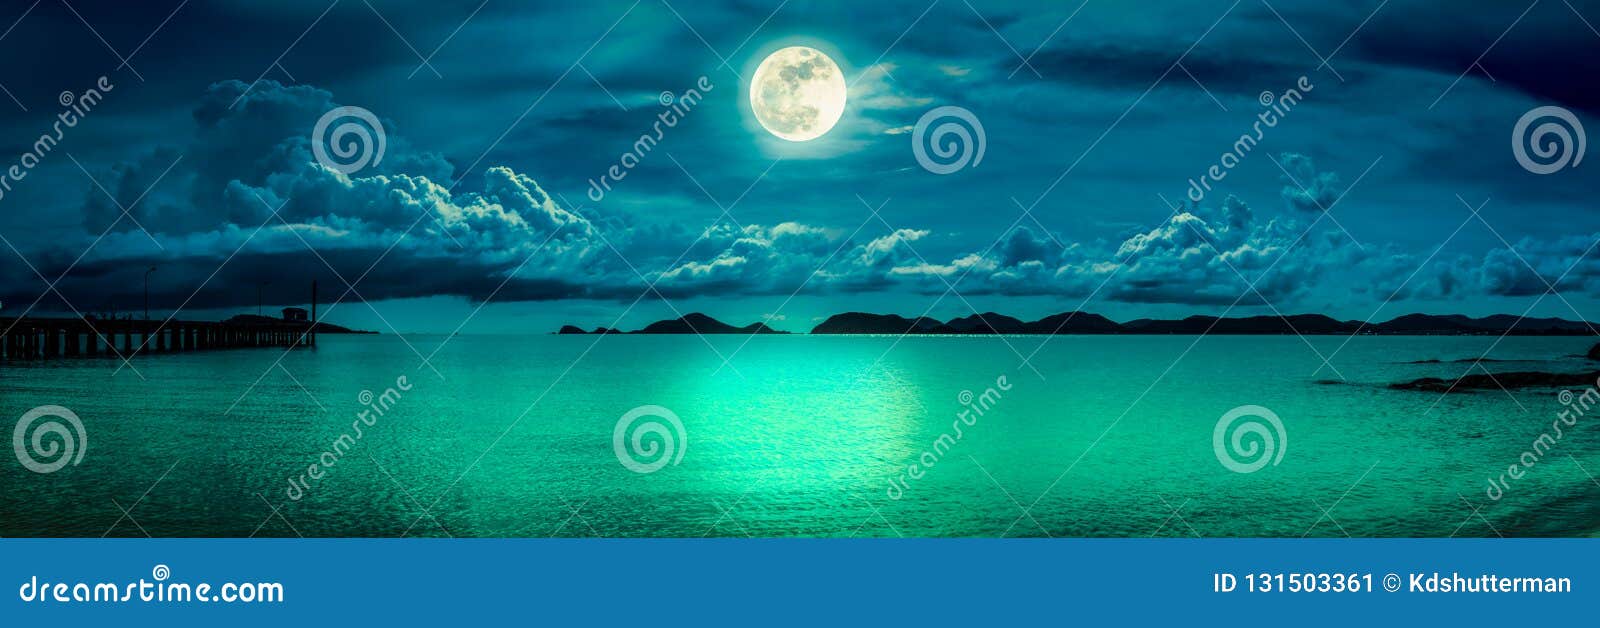 panorama view of the sea. colorful sky with cloud and bright full moon on seascape to night. serenity nature background, outdoor